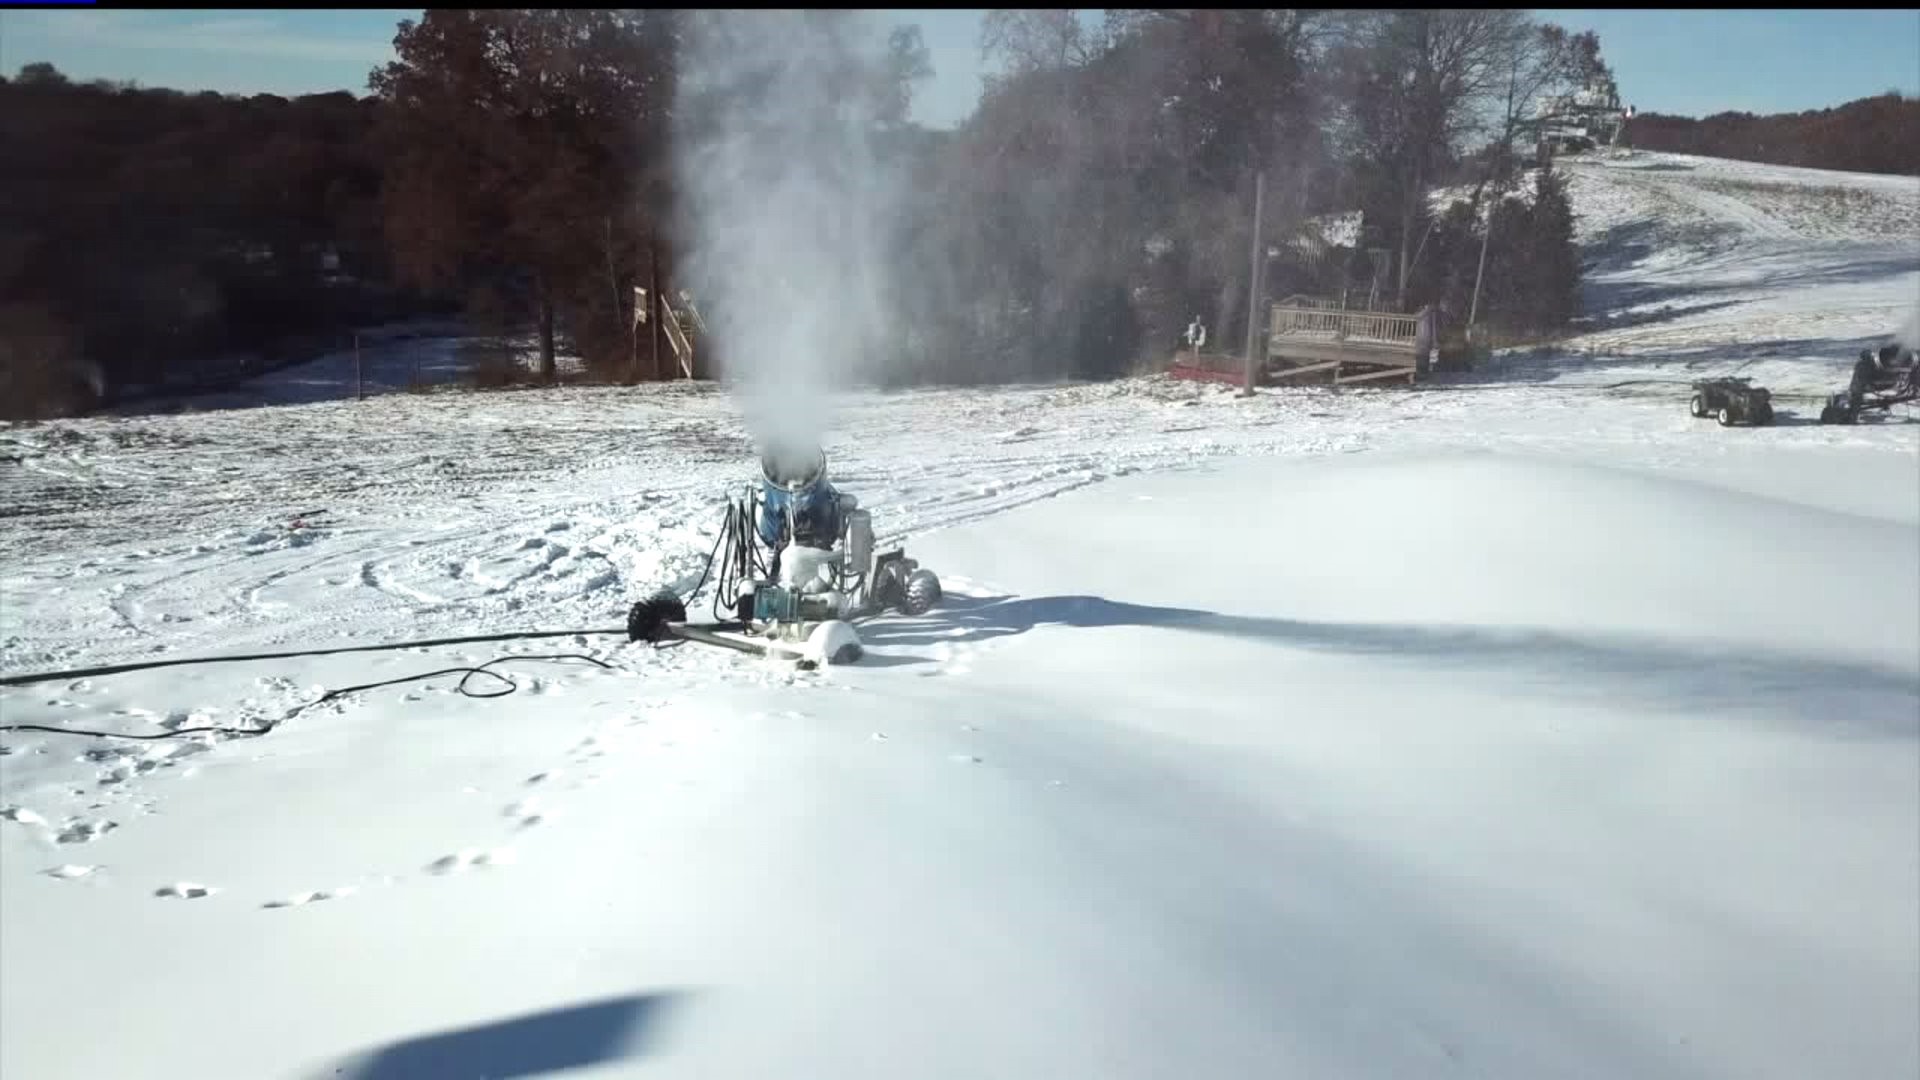 Snow Star is making Snow for the season